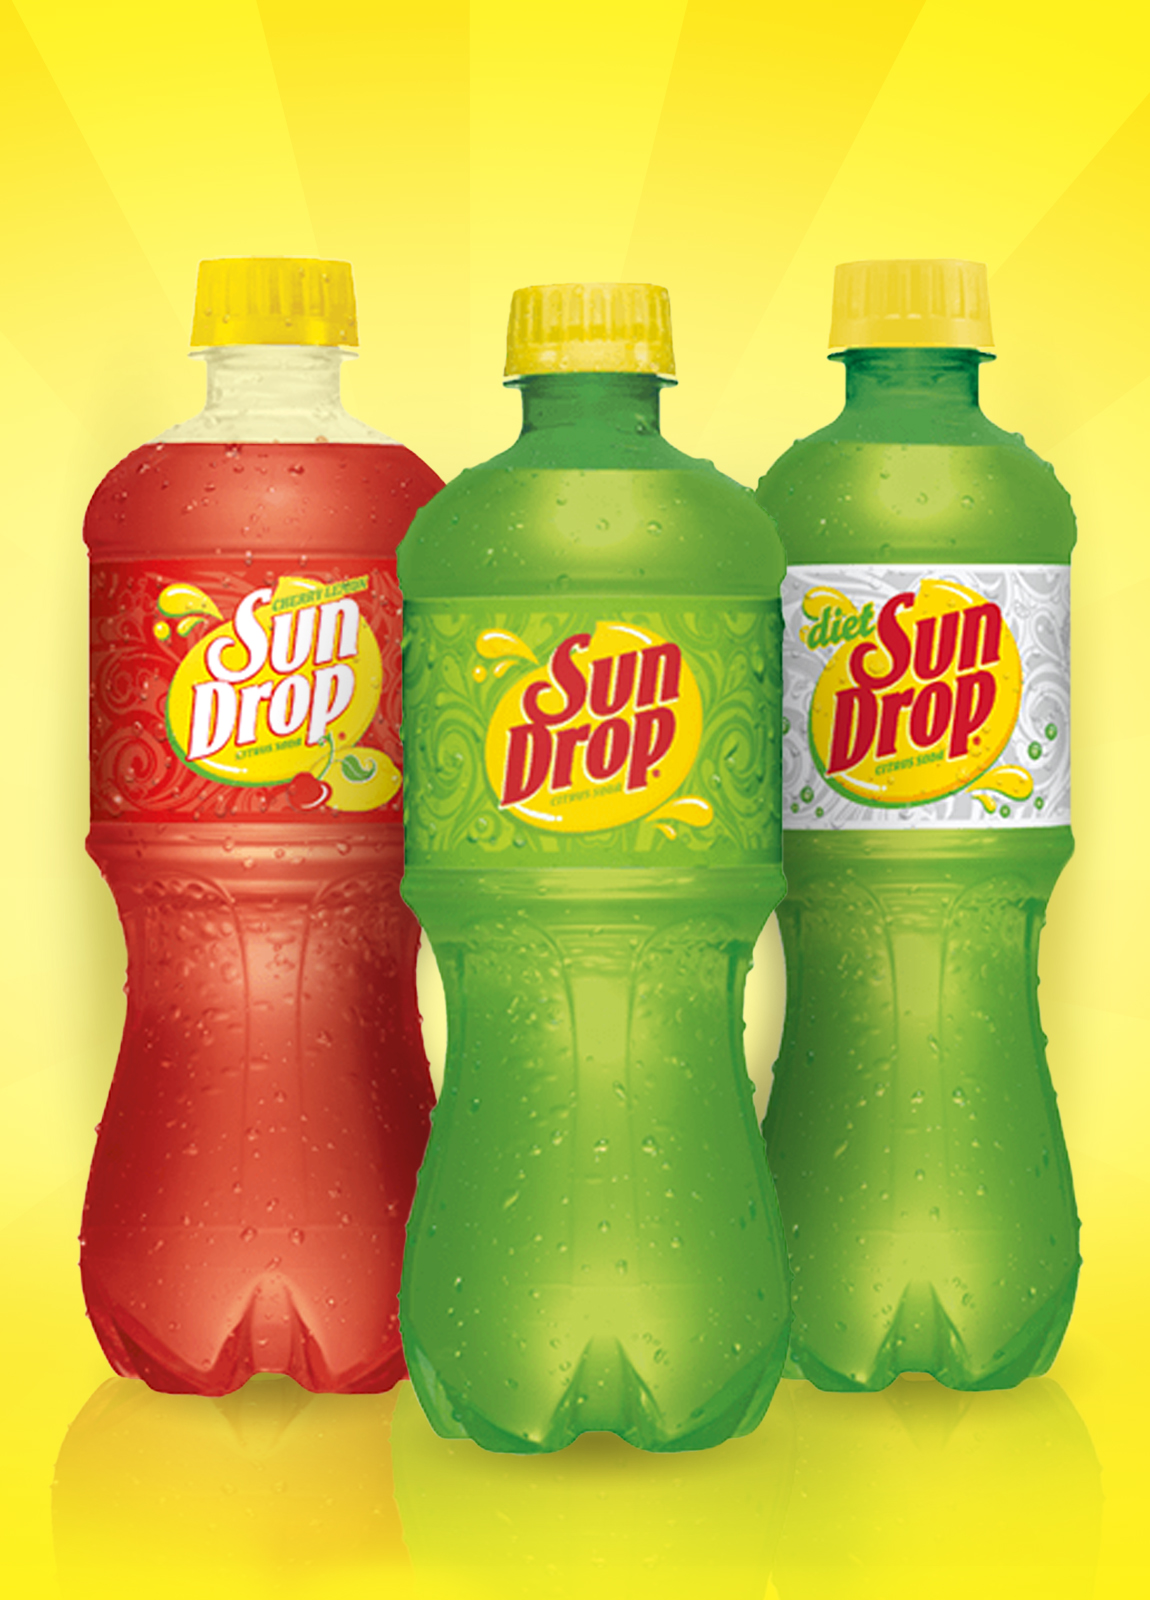 It's a soda. A citrus soda, to be precise. It's a lemon, lime, and orange trifecta of surprisingly good that delights and refreshes the taste buds.